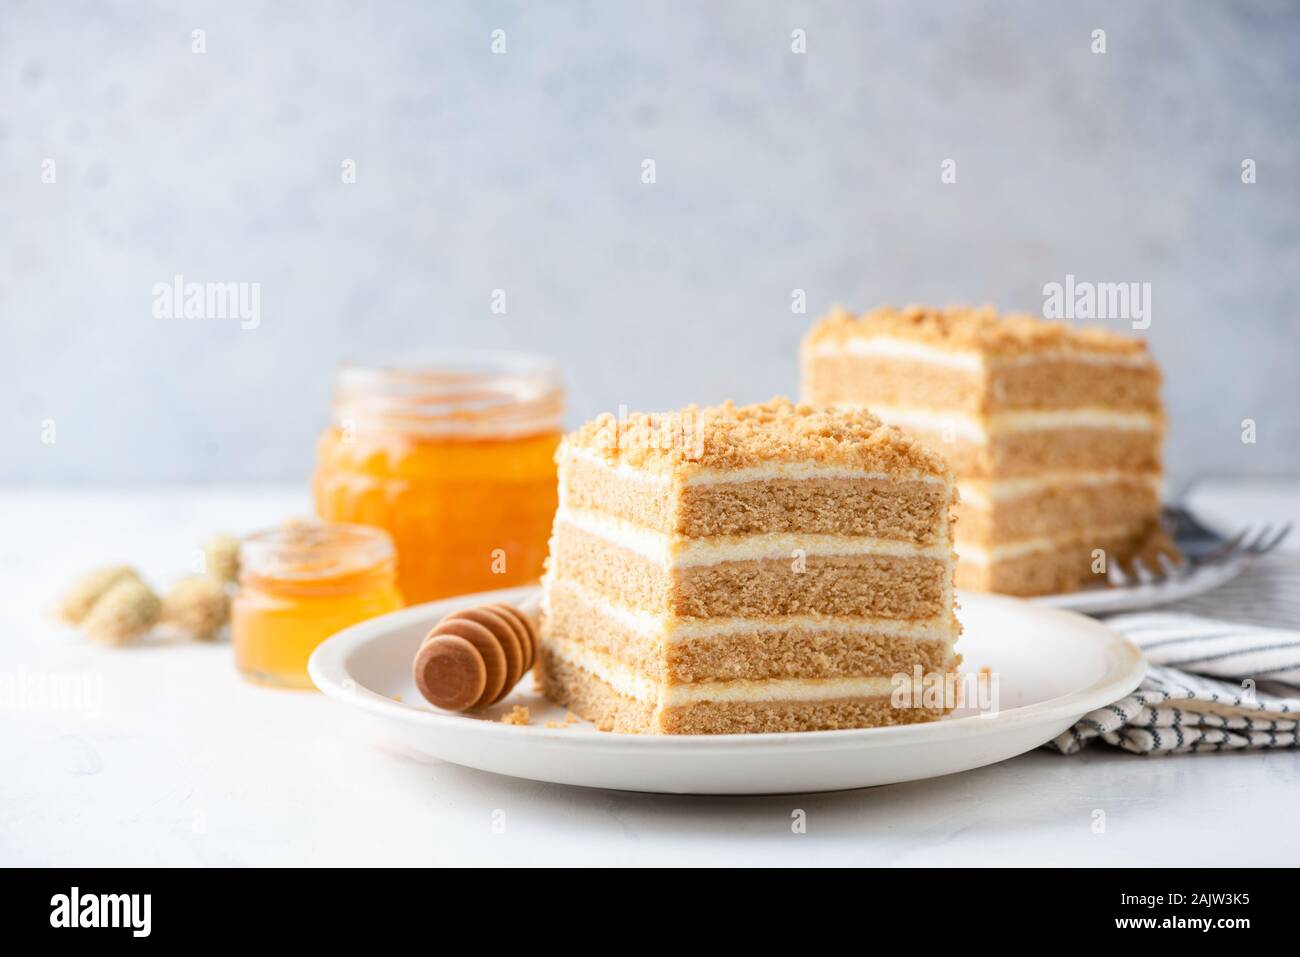 Slice of layered honey cake Medovik on a white plate with copy space for text, horizontal orientation Stock Photo